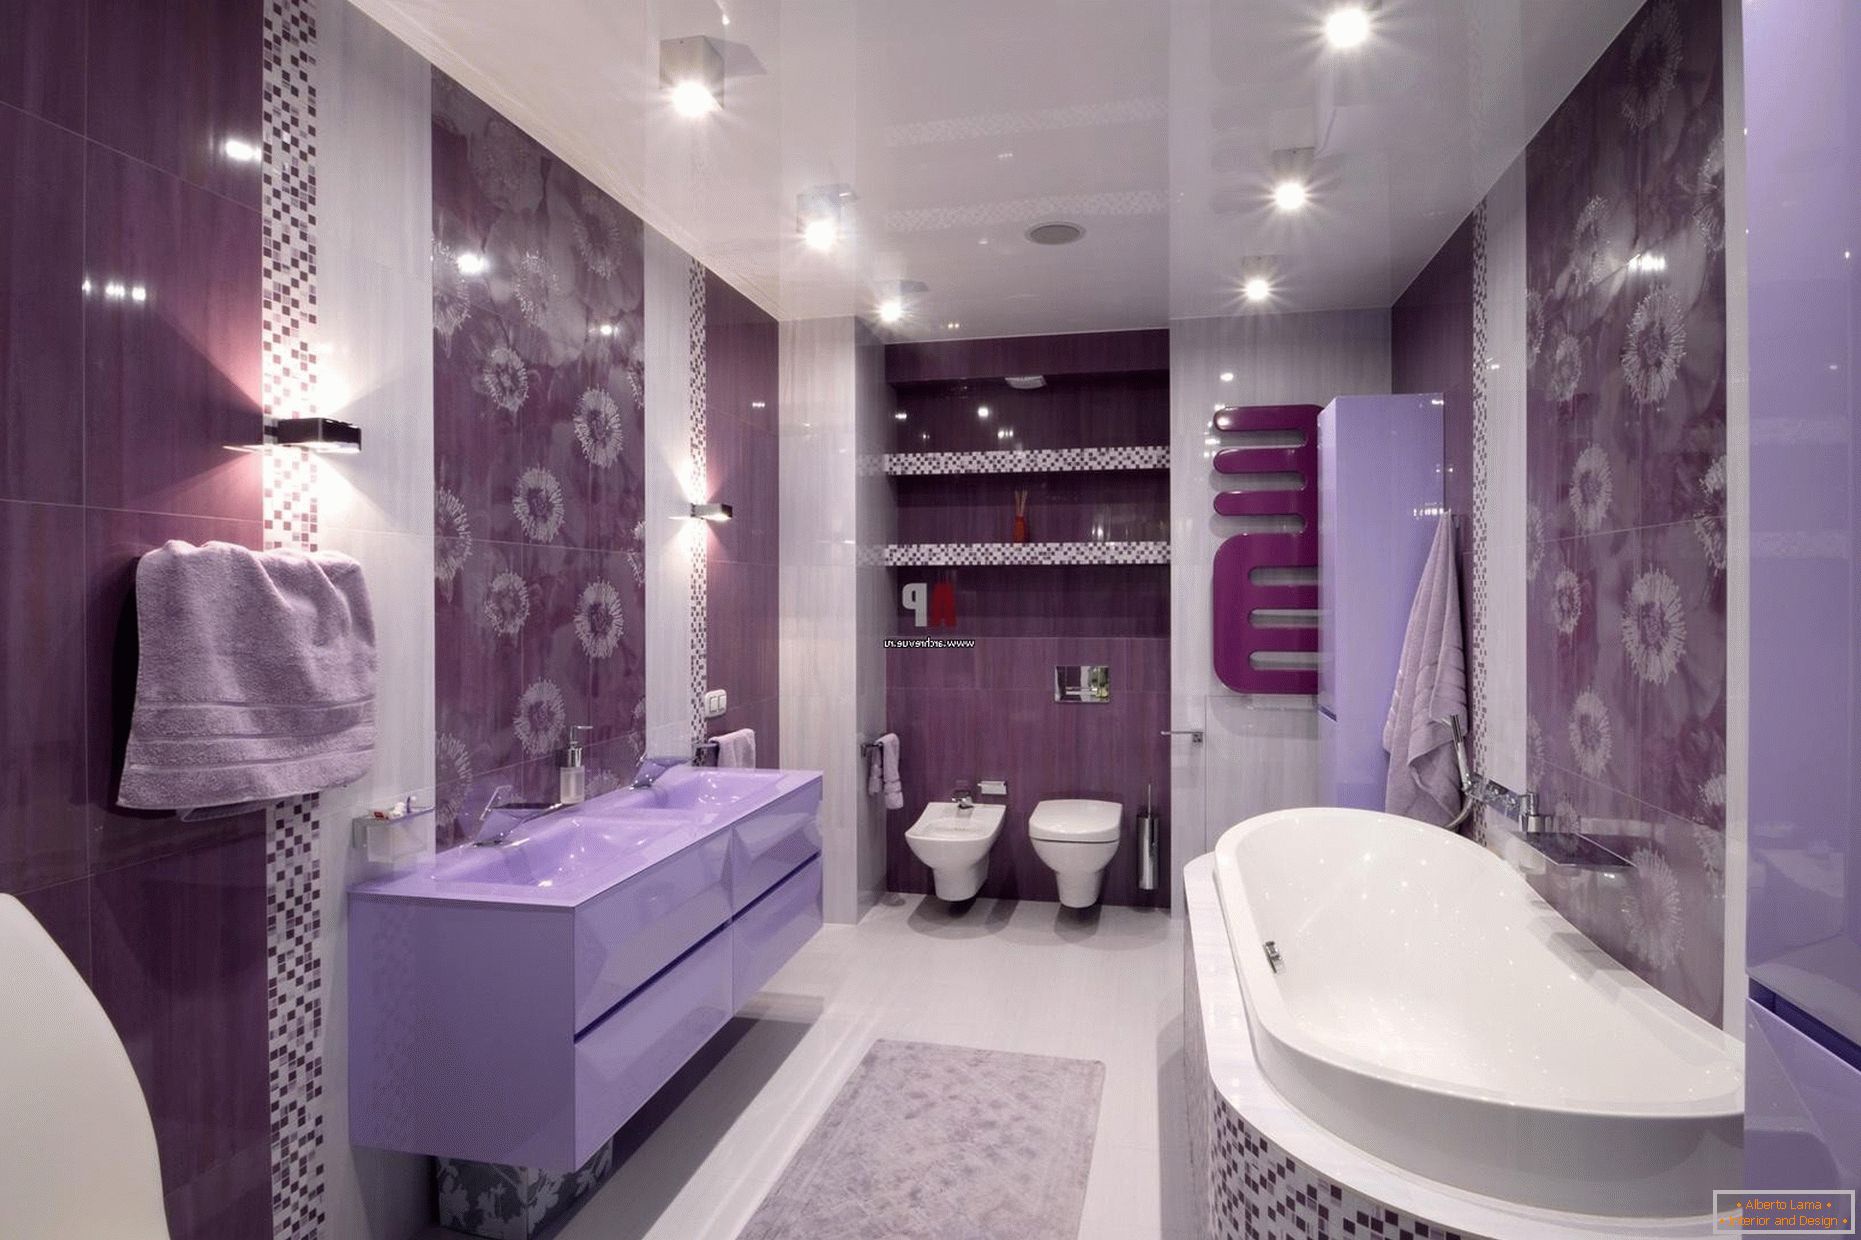 Luxurious design of the bathroom in lilac flowers